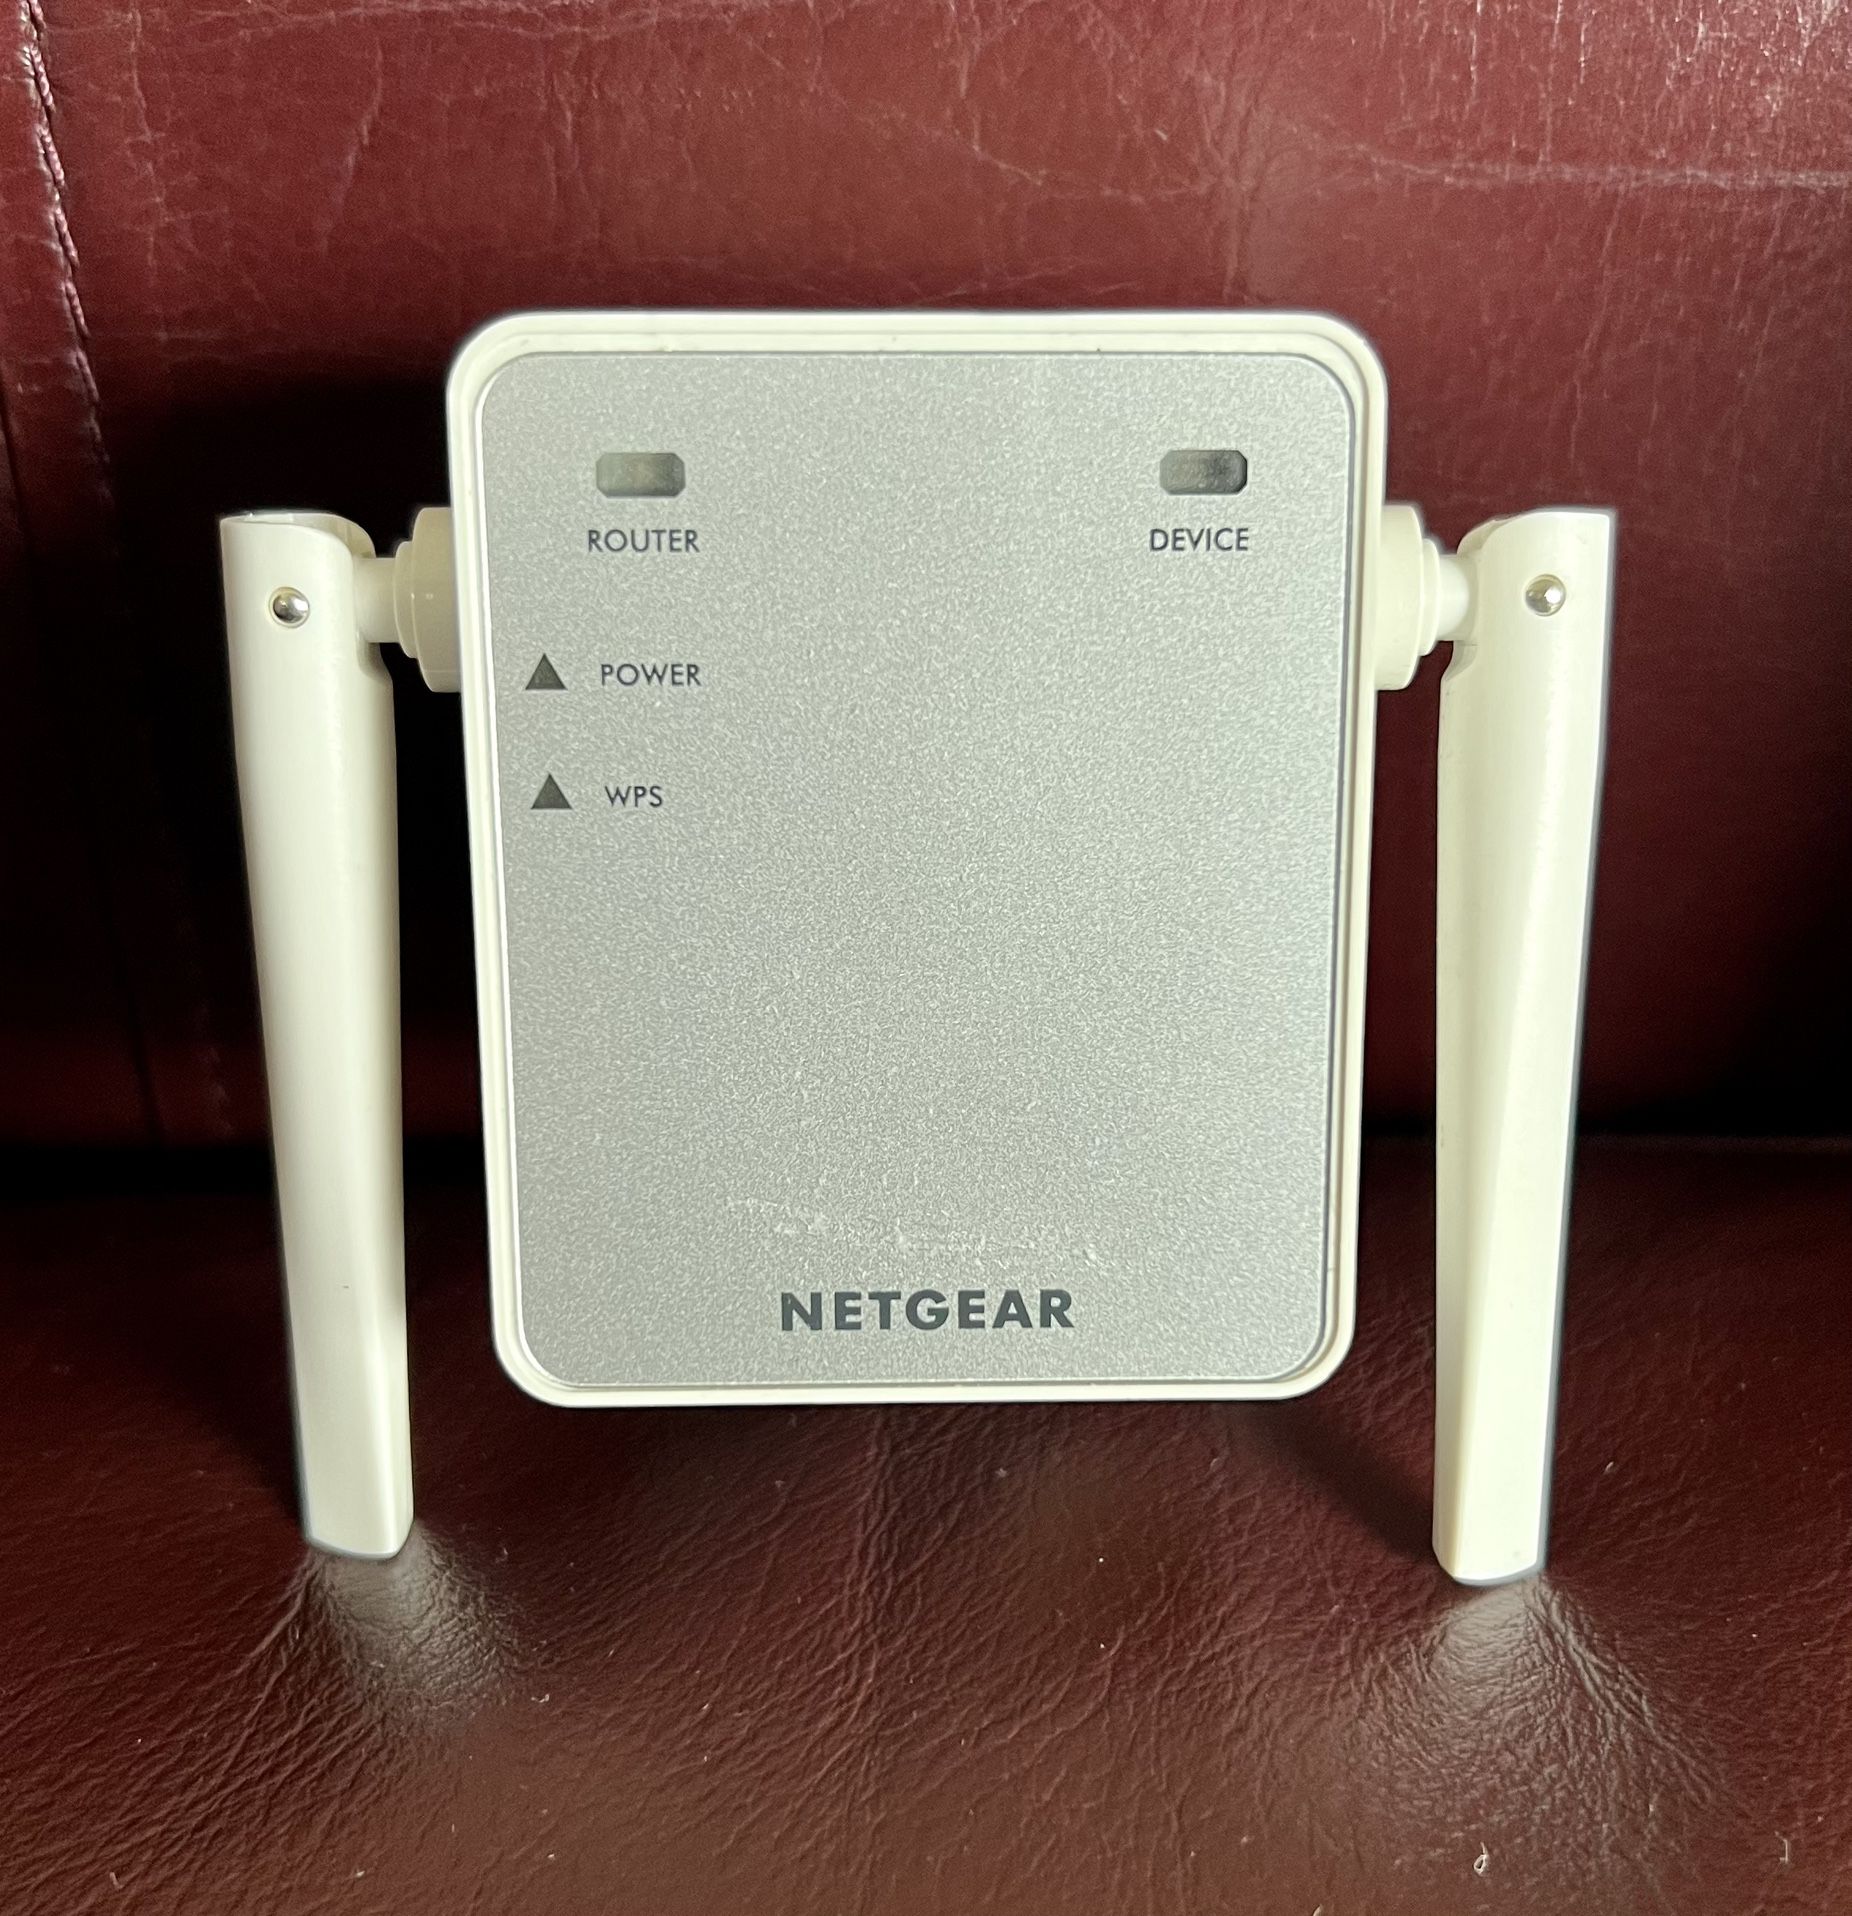 NETGEAR Wi-Fi Range Extender EX2700 Coverage Up to 800 Sq Ft and 10 devices with N300 Wireless